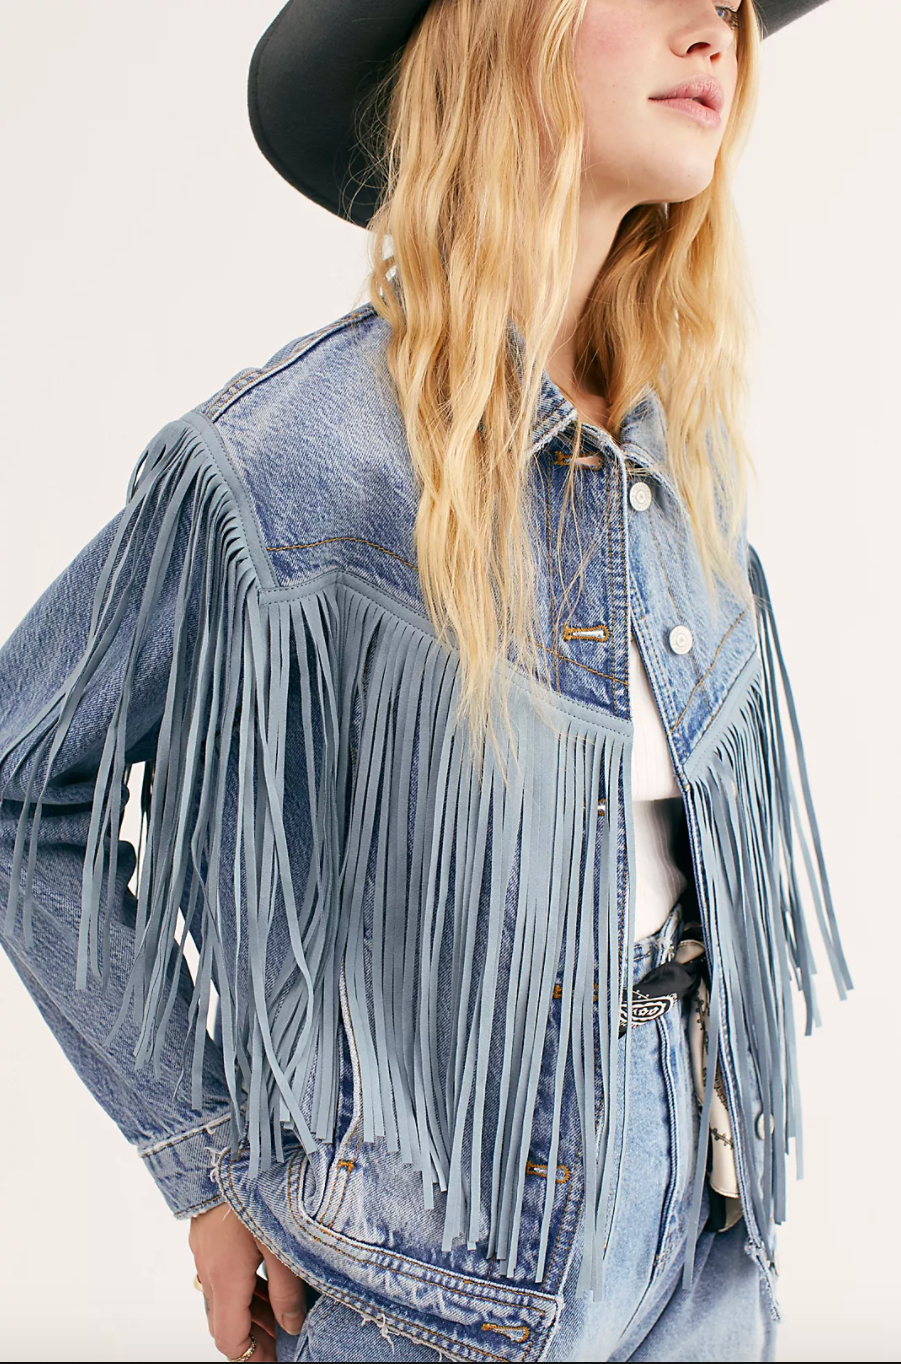  Courtesy of Free People.